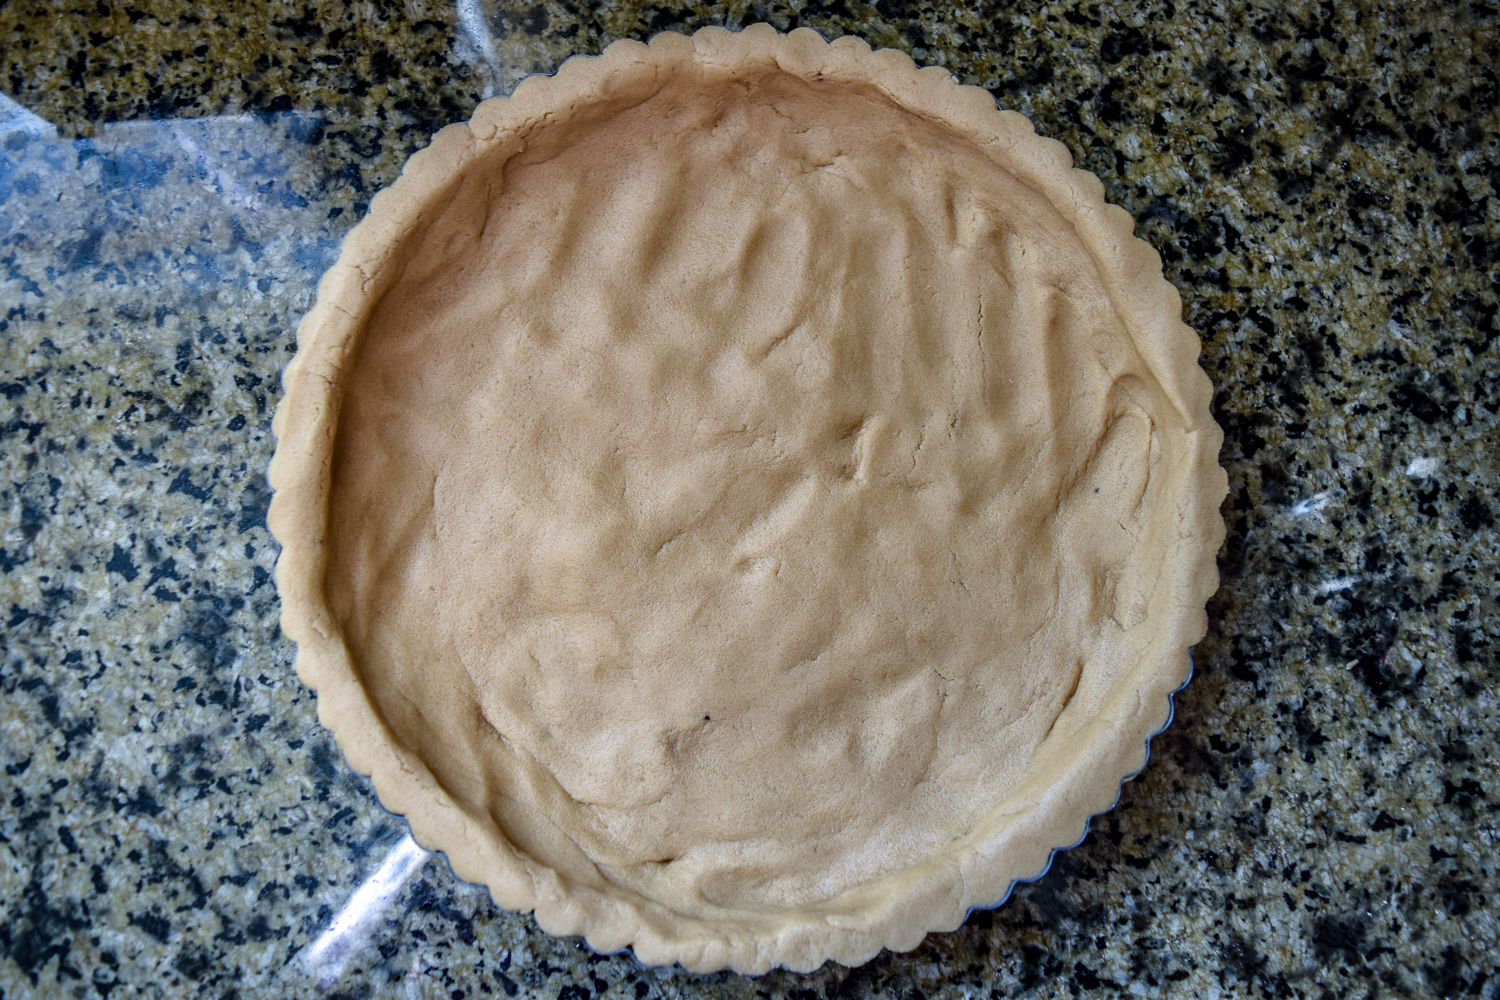 Shortbread dough pressed into tart pan from top